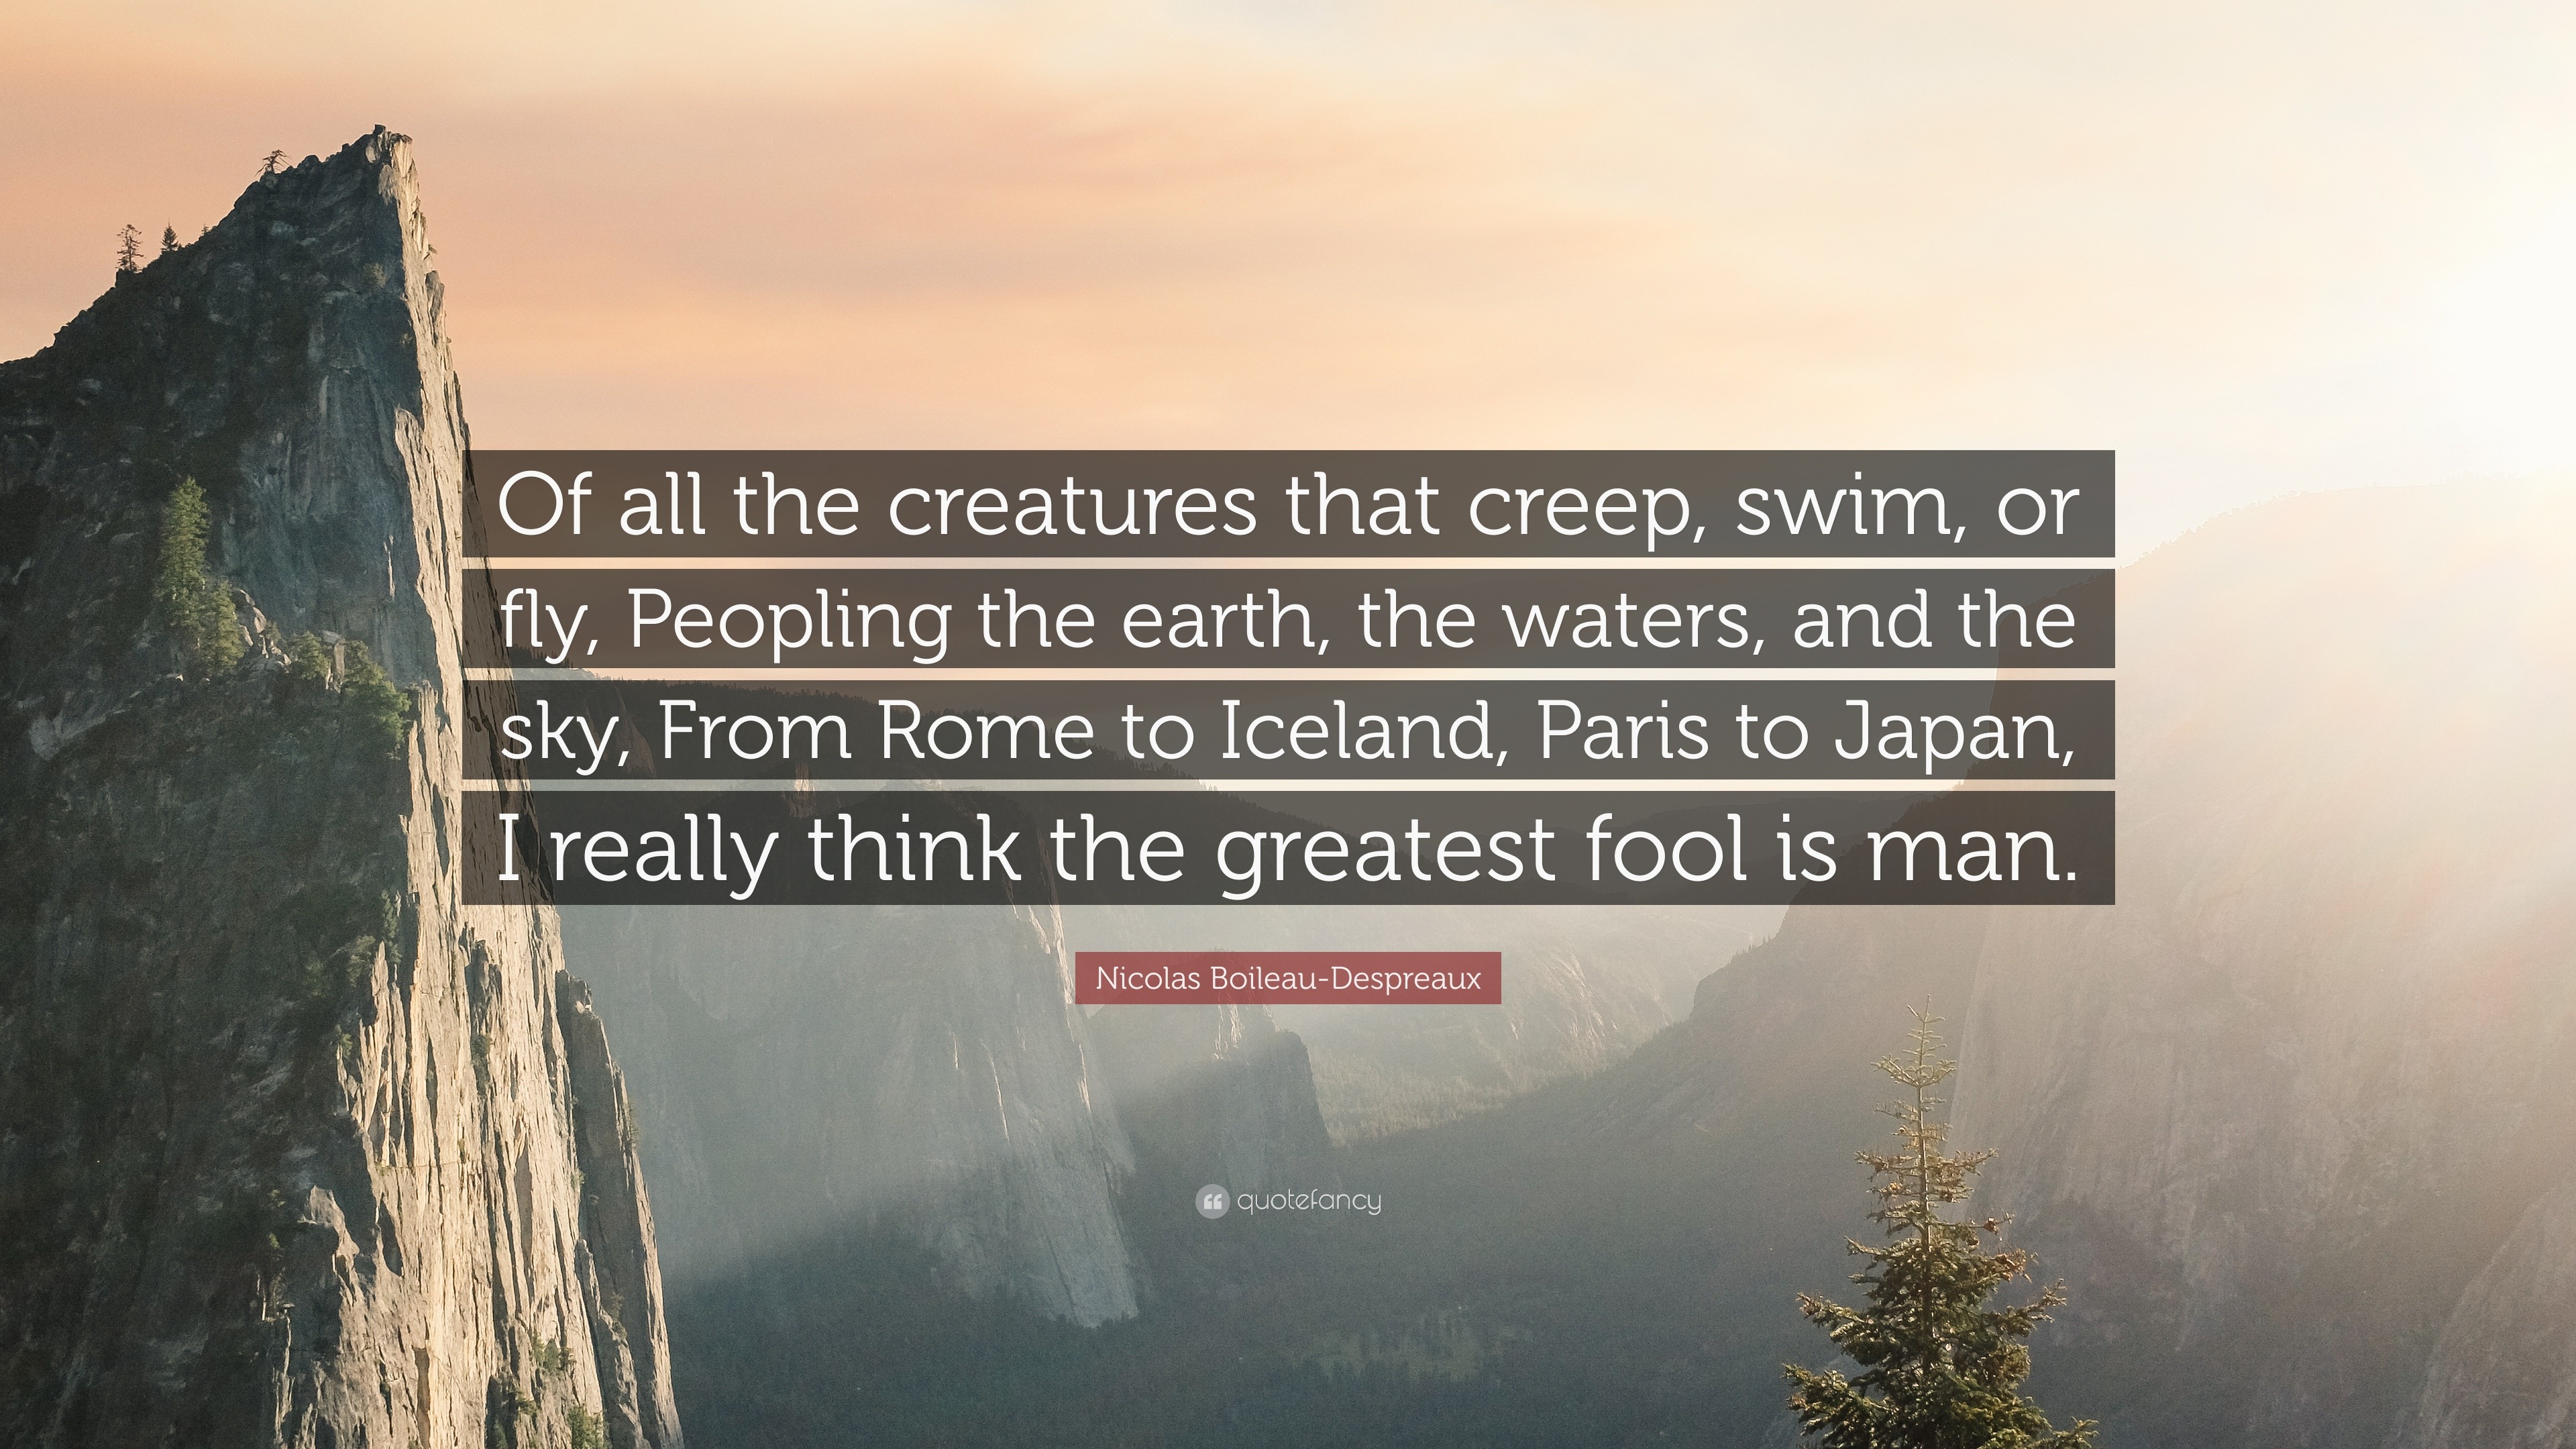 Nicolas Boileau Despreaux Quote Of All The Creatures That Creep Swim Or Fly Peopling The Earth The Waters And The Sky From Rome To Iceland Paris 7 Wallpapers Quotefancy